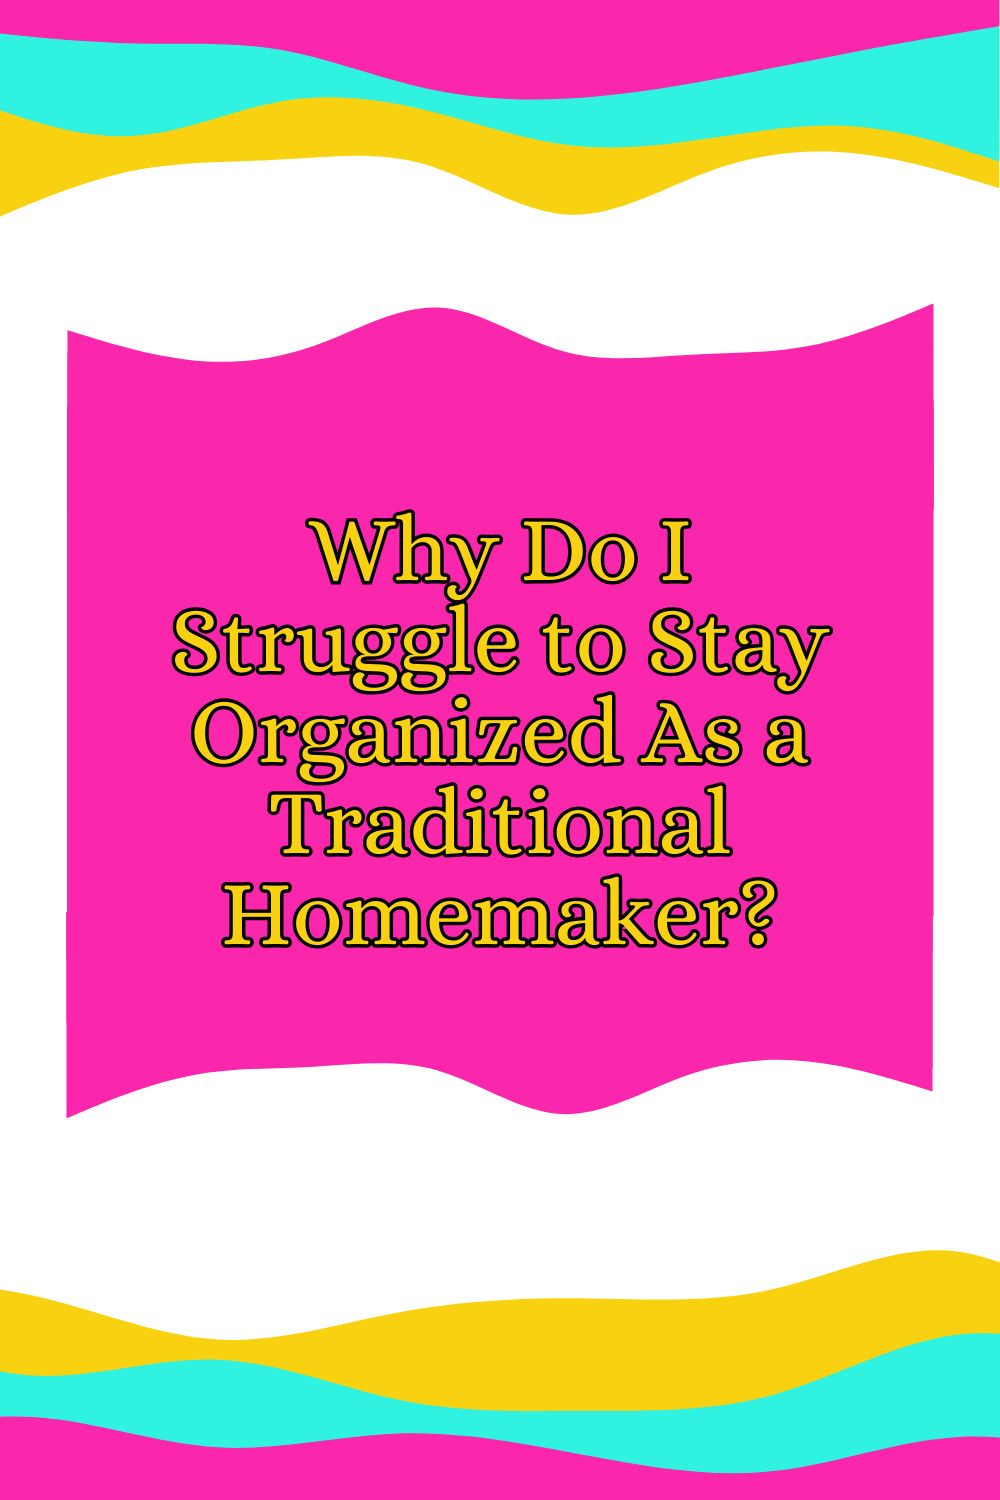 Why Do I Struggle to Stay Organized As a Traditional Homemaker?